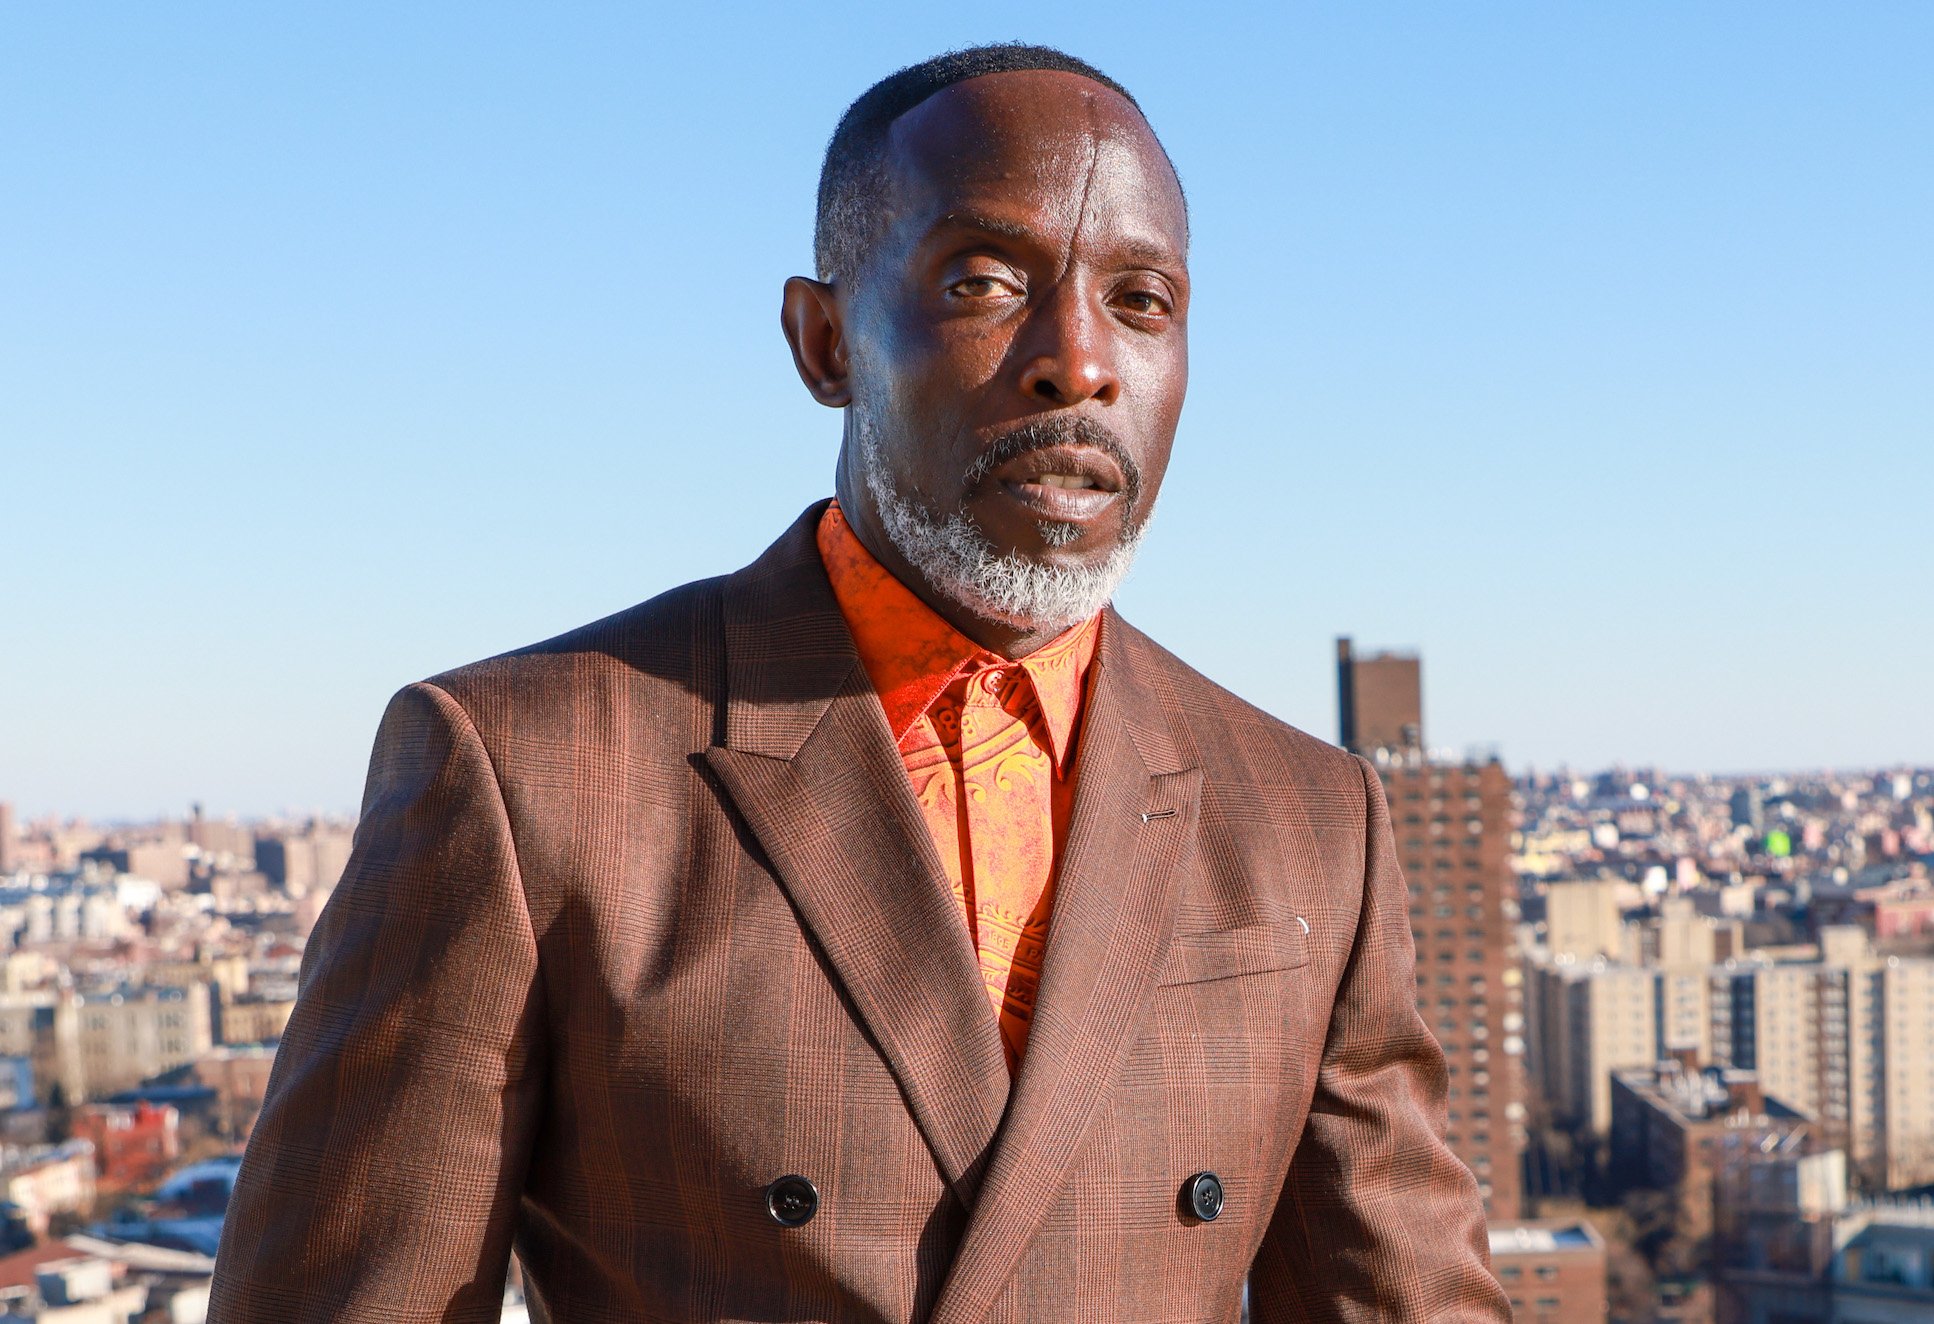 Michael K. Williams in a suit against a city backdrop. Michael K. Williams earned his net worth from 'The Wire' and is now nominated for an Emmy thanks to 'Lovecraft Country'